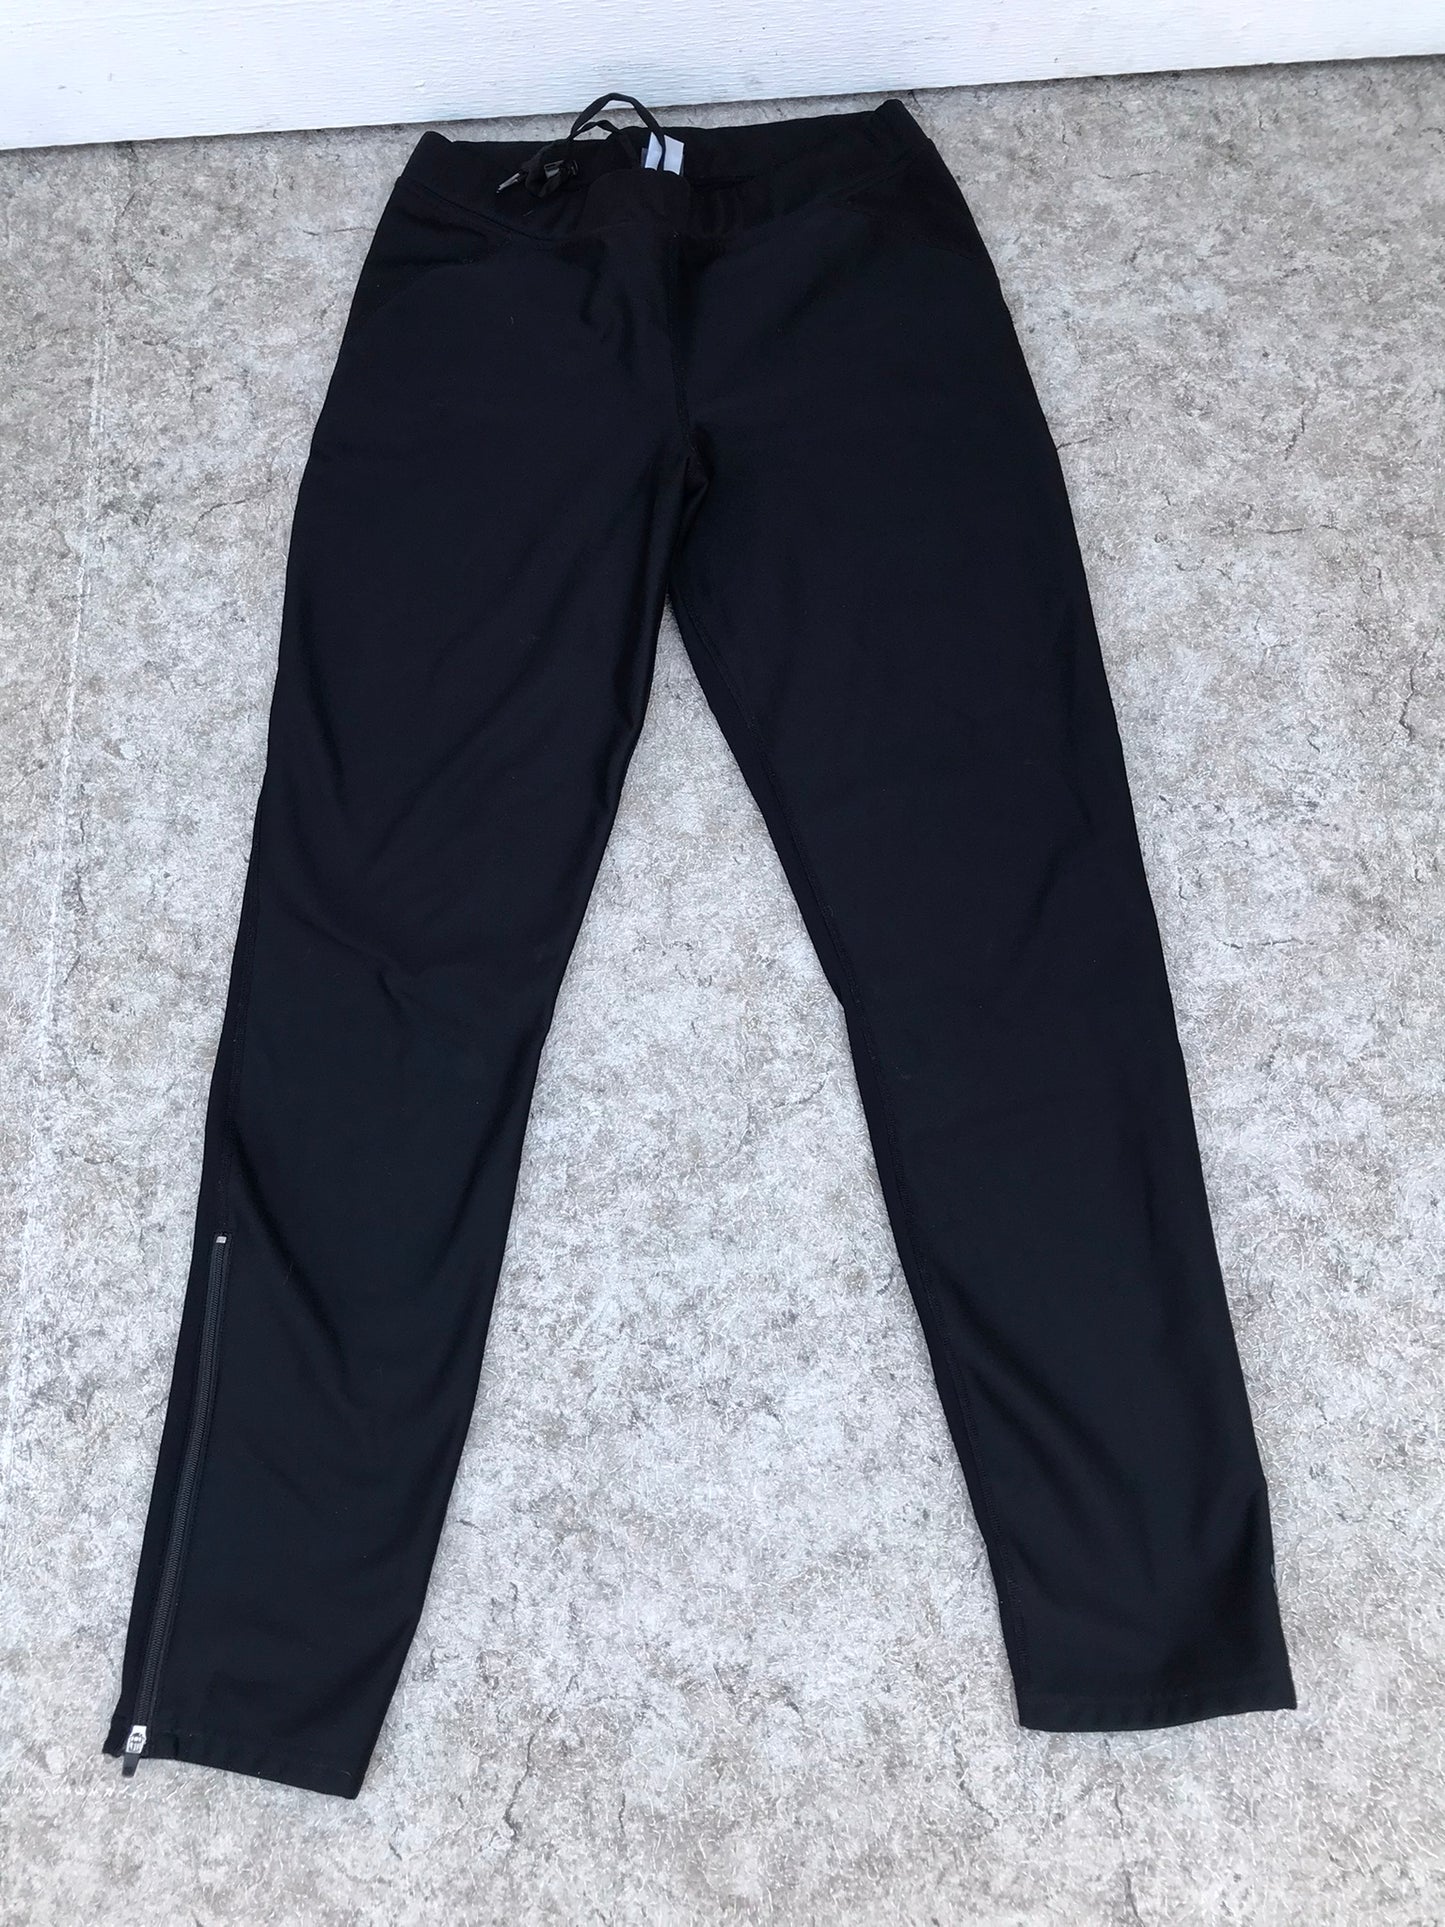 Rain Wind Cold Men's Size Large MEC Hydro Active Wear Sports Pants Brushed Fleece Lining Zippers Up Sides Draw String NEW Demo Model